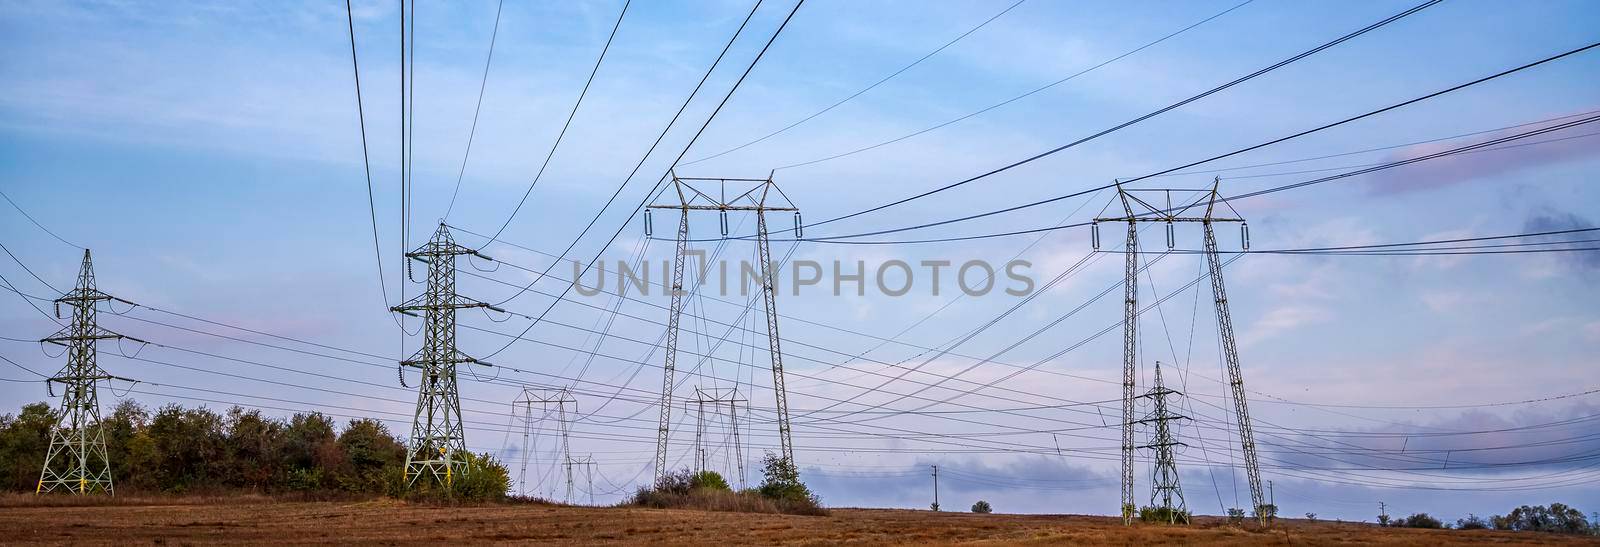 Rows of electrical towers and power lines. Panoramic view by EdVal